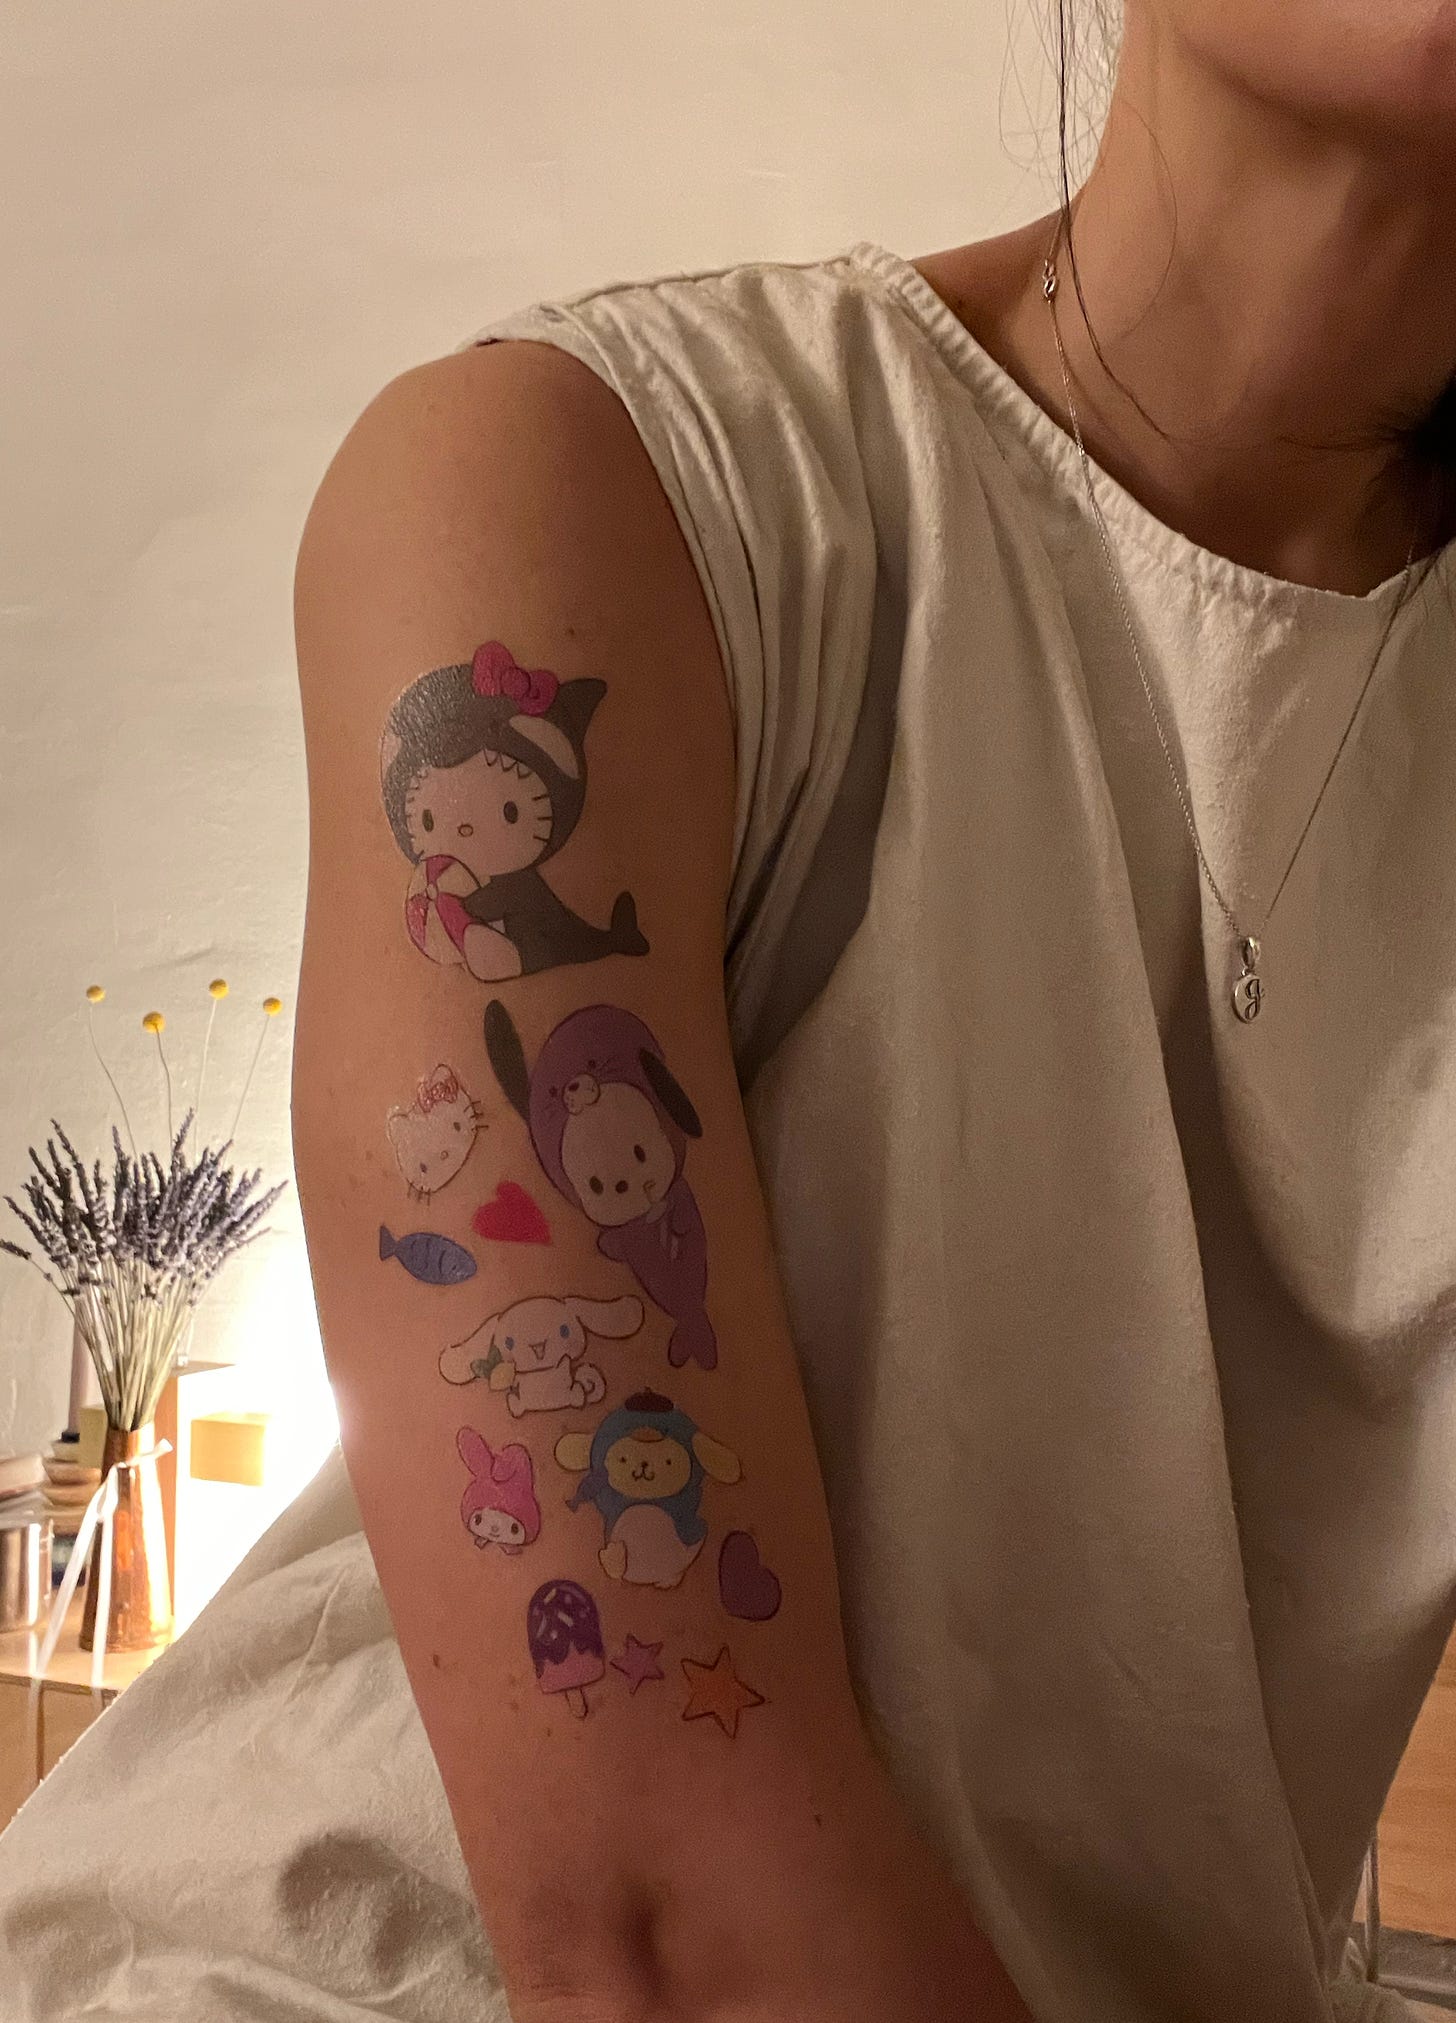 Image of a woman's arm covered in temporary Sanrio tattoos.